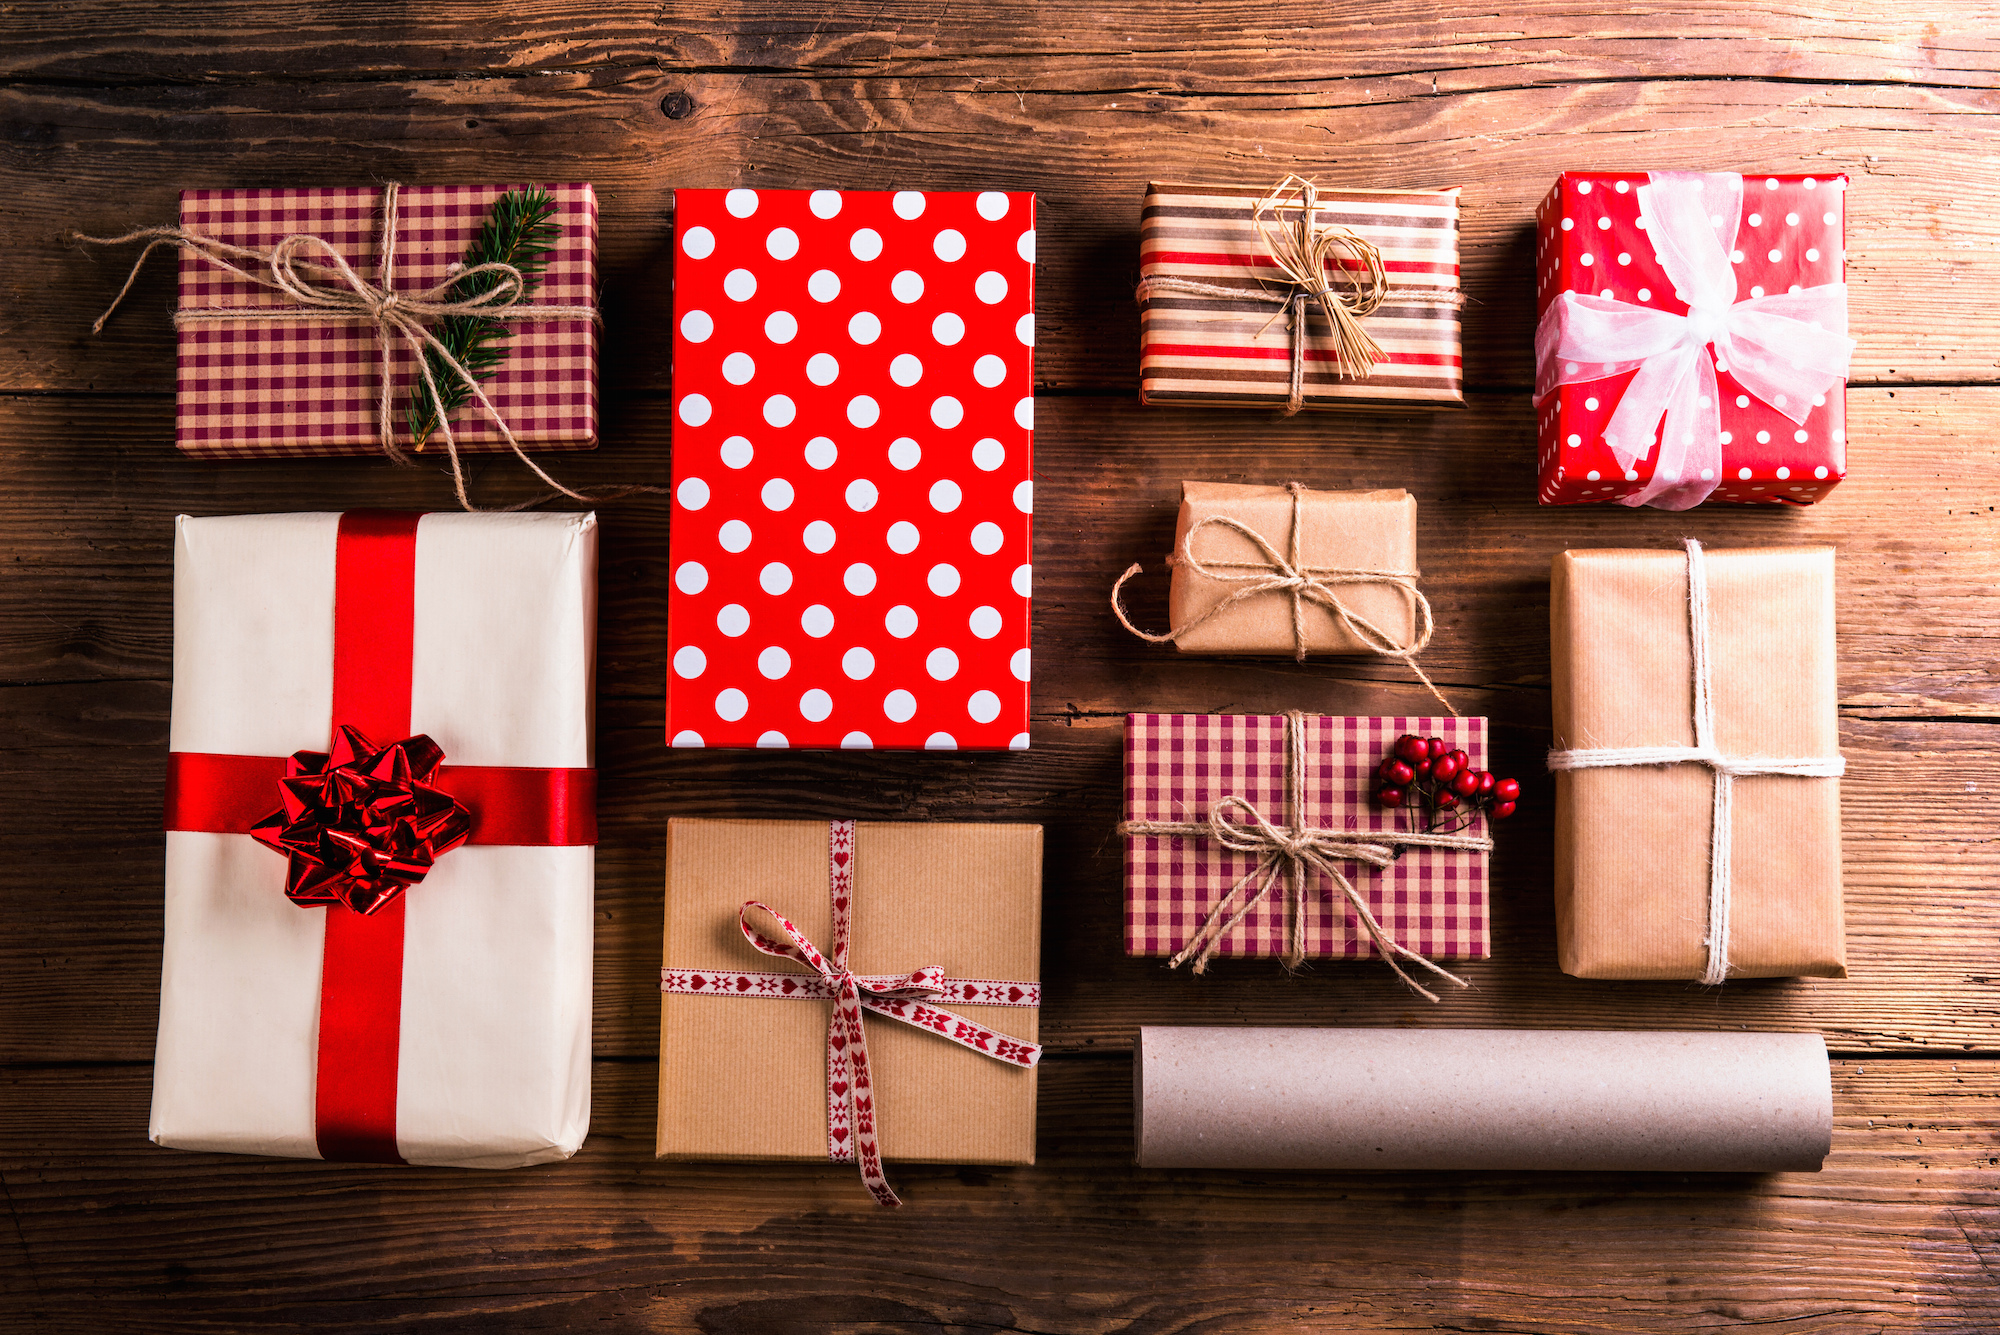 9 variously wrapped gifts in red plaid and polka dots tied with twine